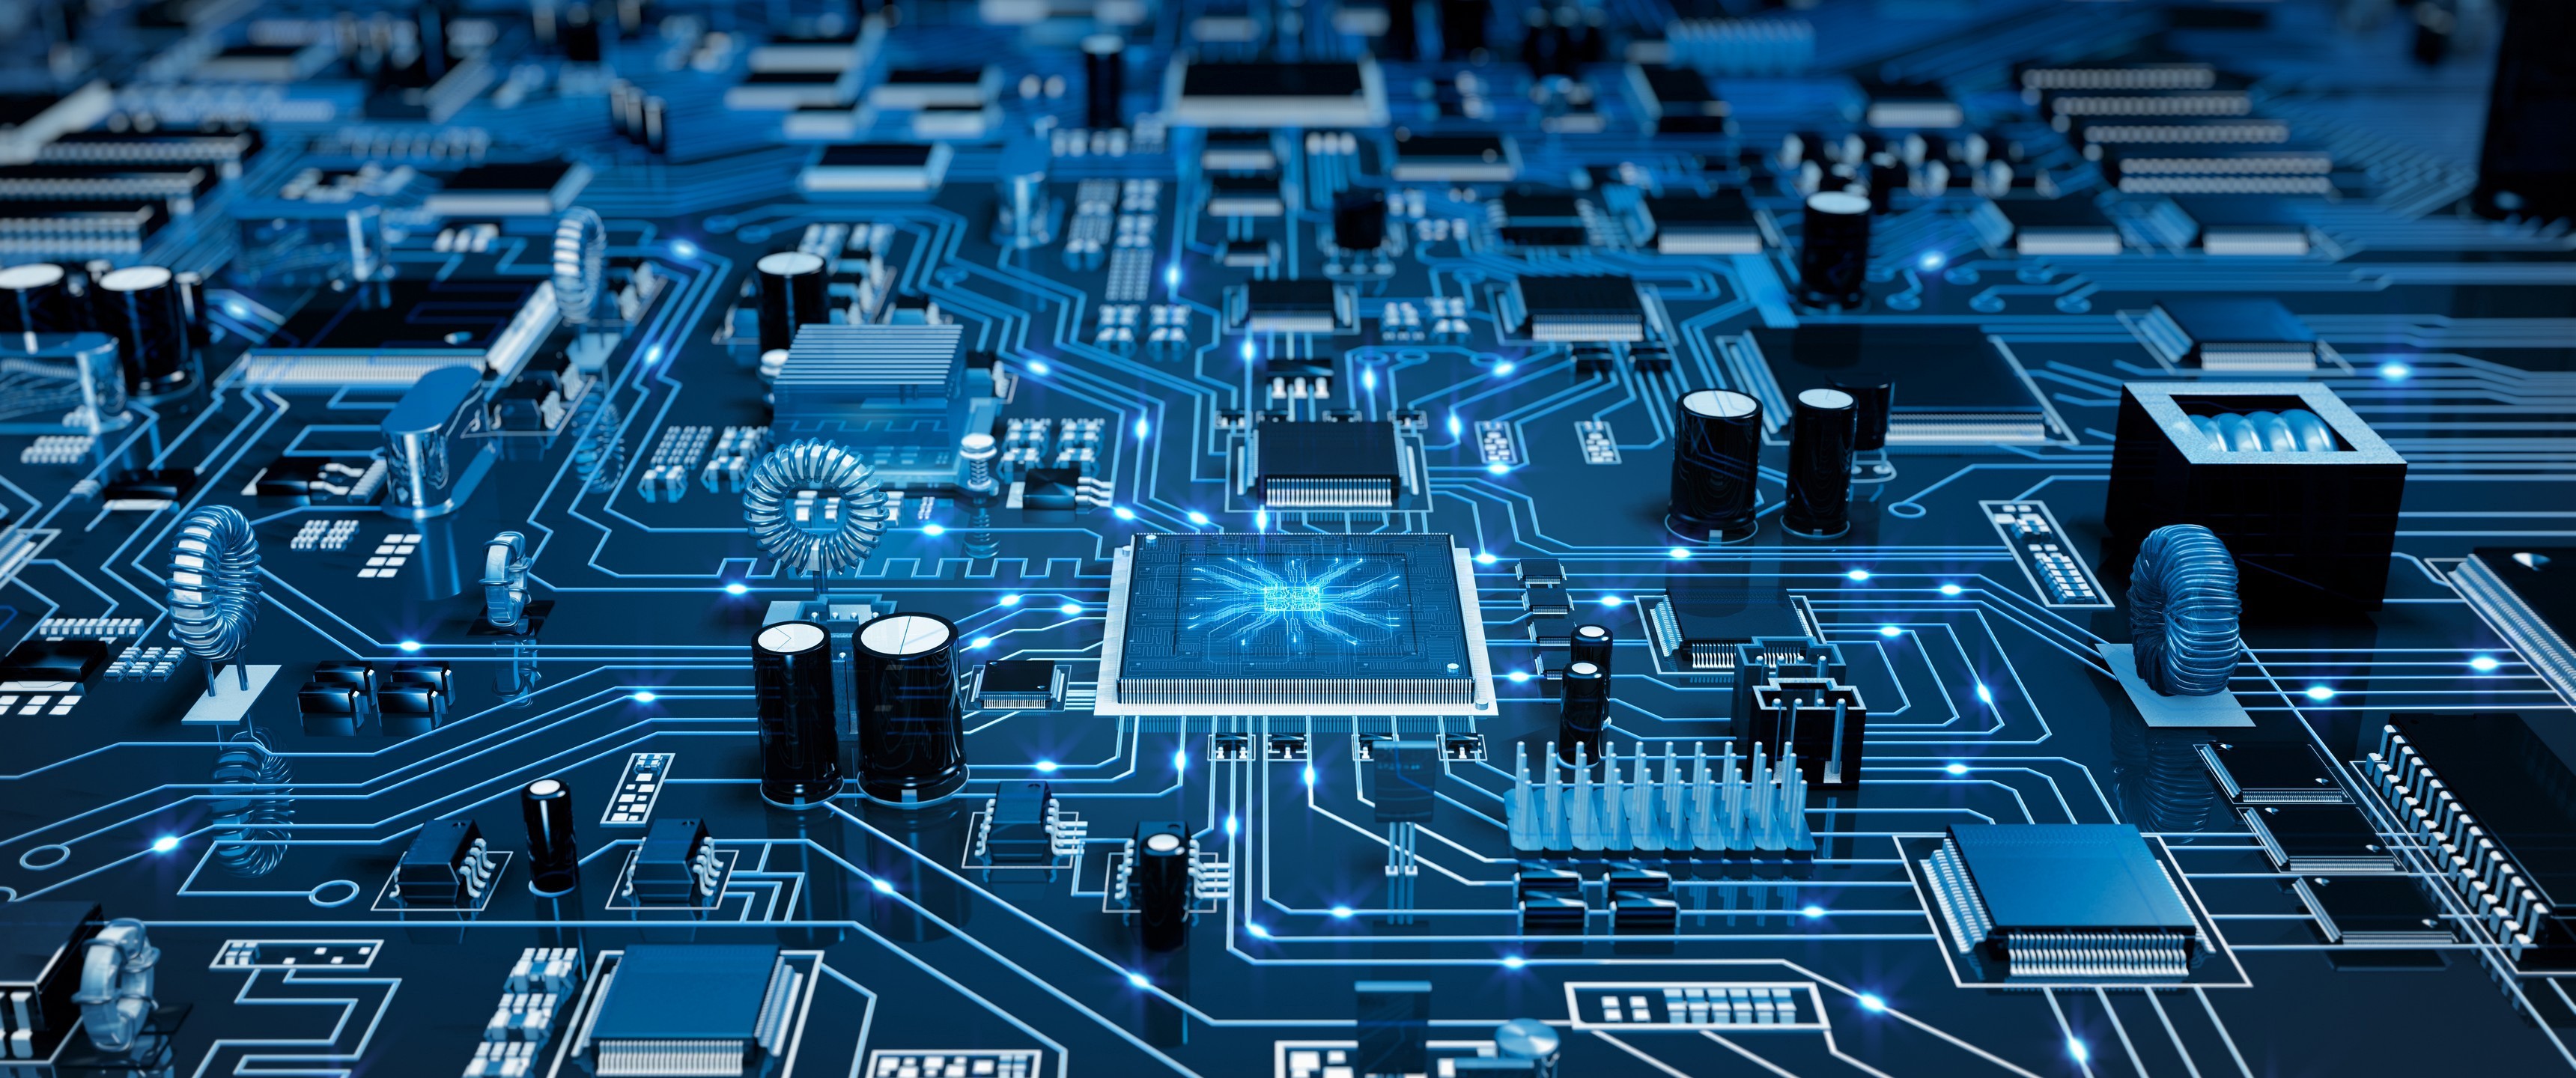 circuit board wallpaper,electronic engineering,electronics,electronic component,product,technology